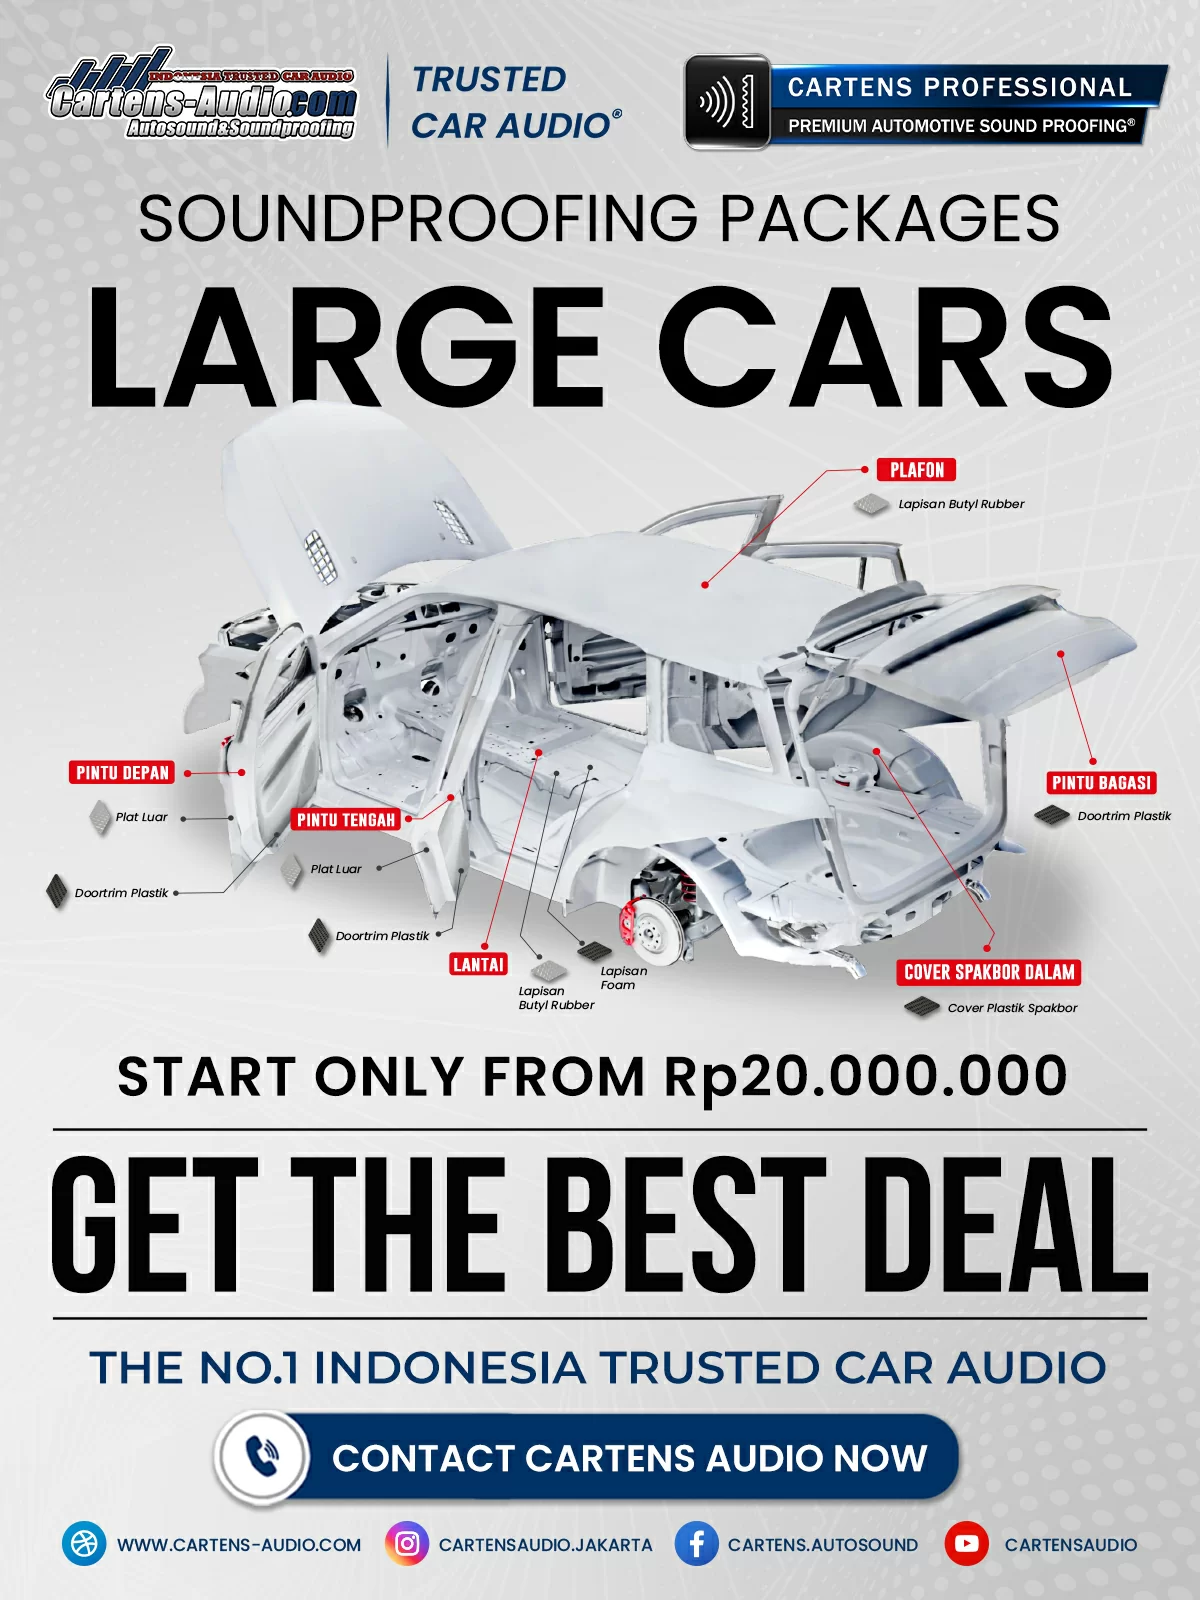 SOUNDPROOFING PACKAGES - LARGE CARS